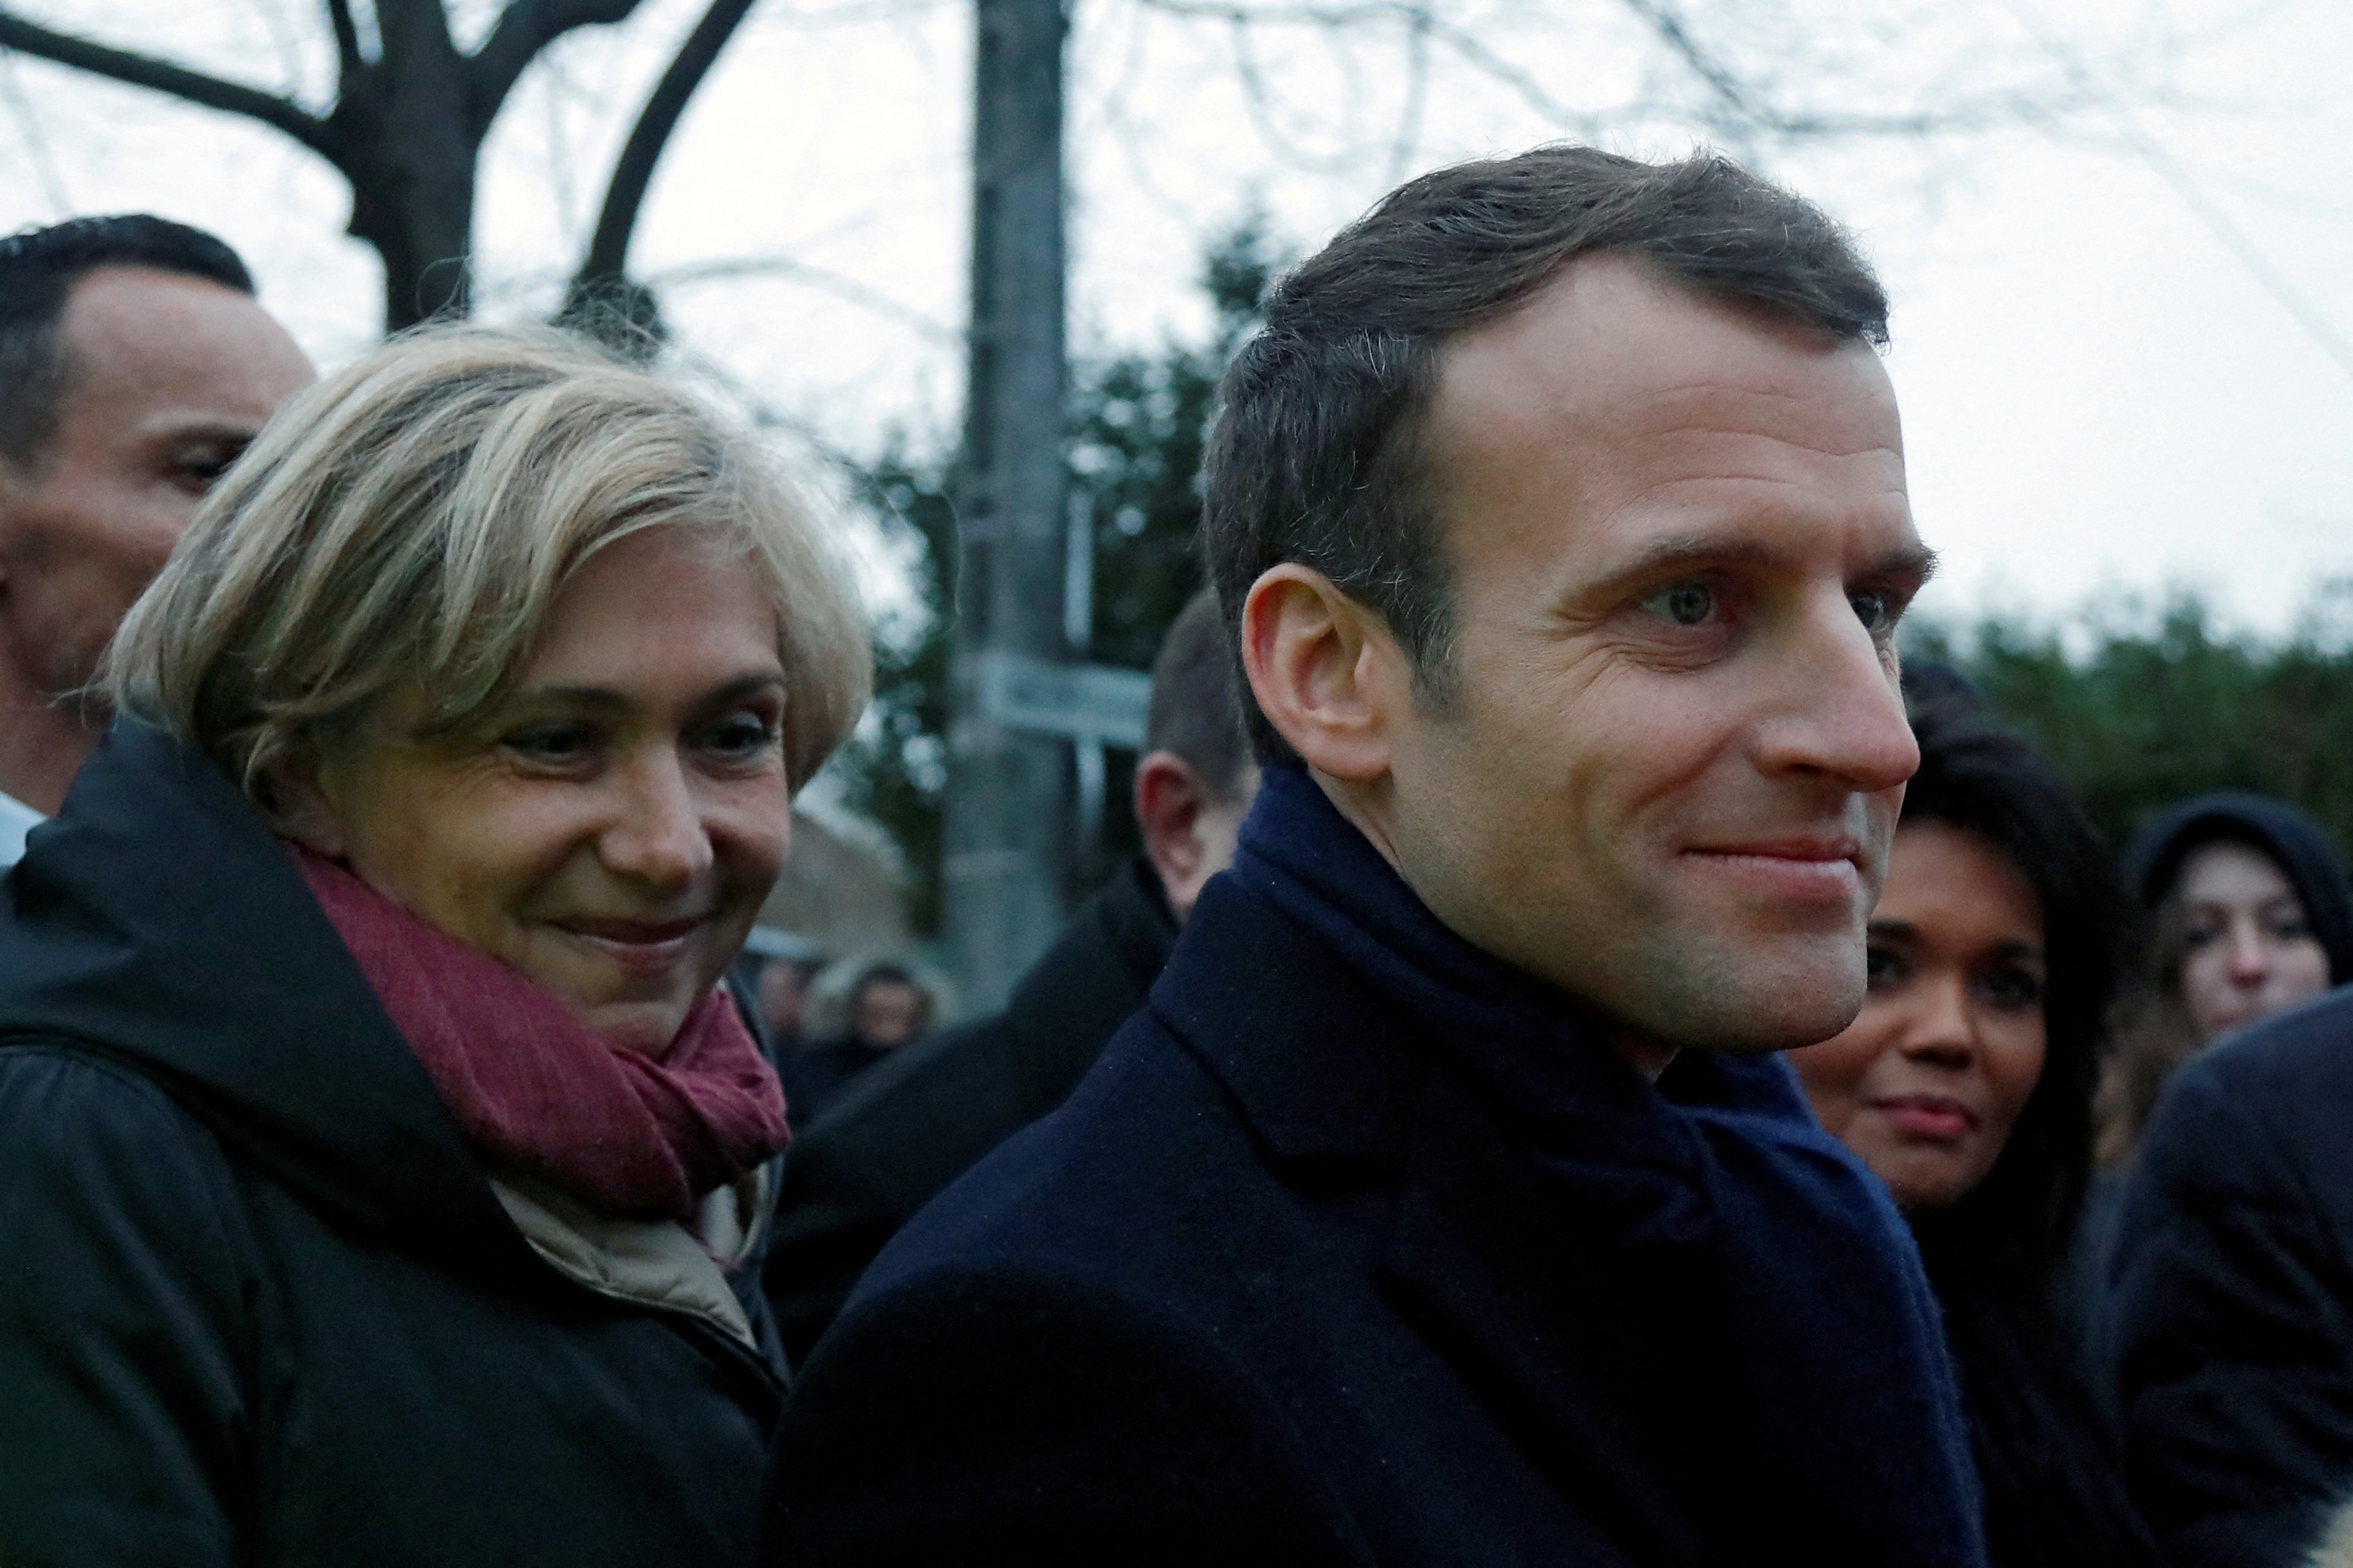 French President Emmanuel Macron and Valerie Pecresse, President of the Ile-de-France region, visit a neighborhood that suffered from flooding after days of heavy rains hit the country, in Villeneuve-Saint-Georges